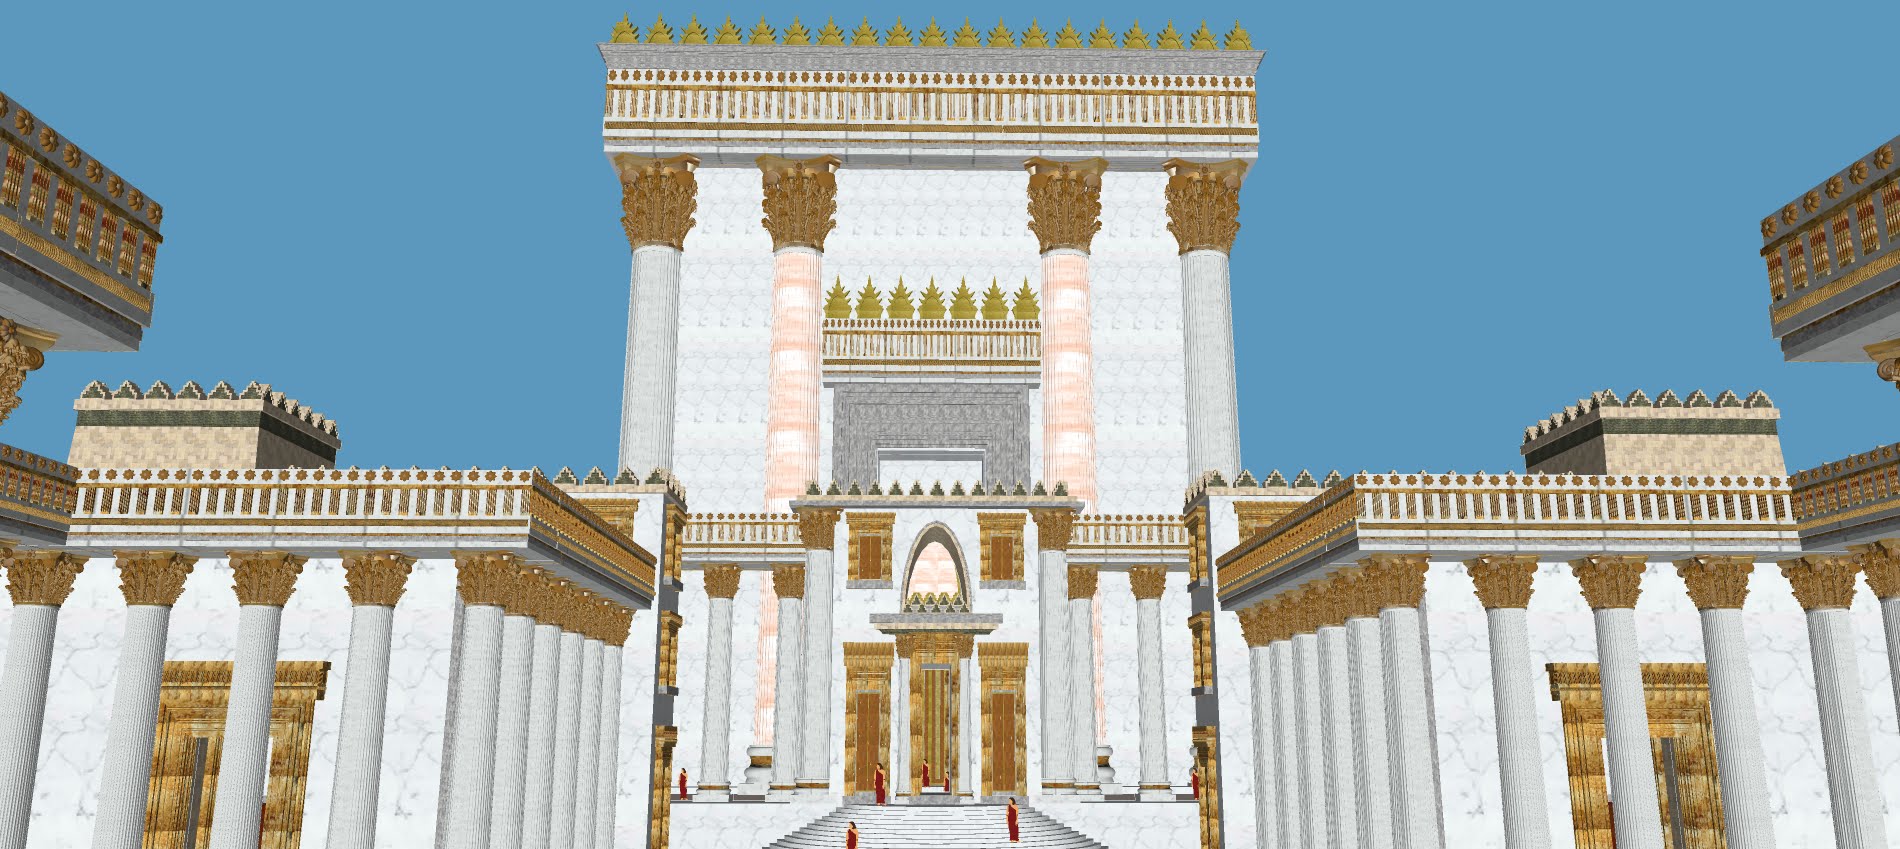 jerusalem and the lost temple of the jews free download